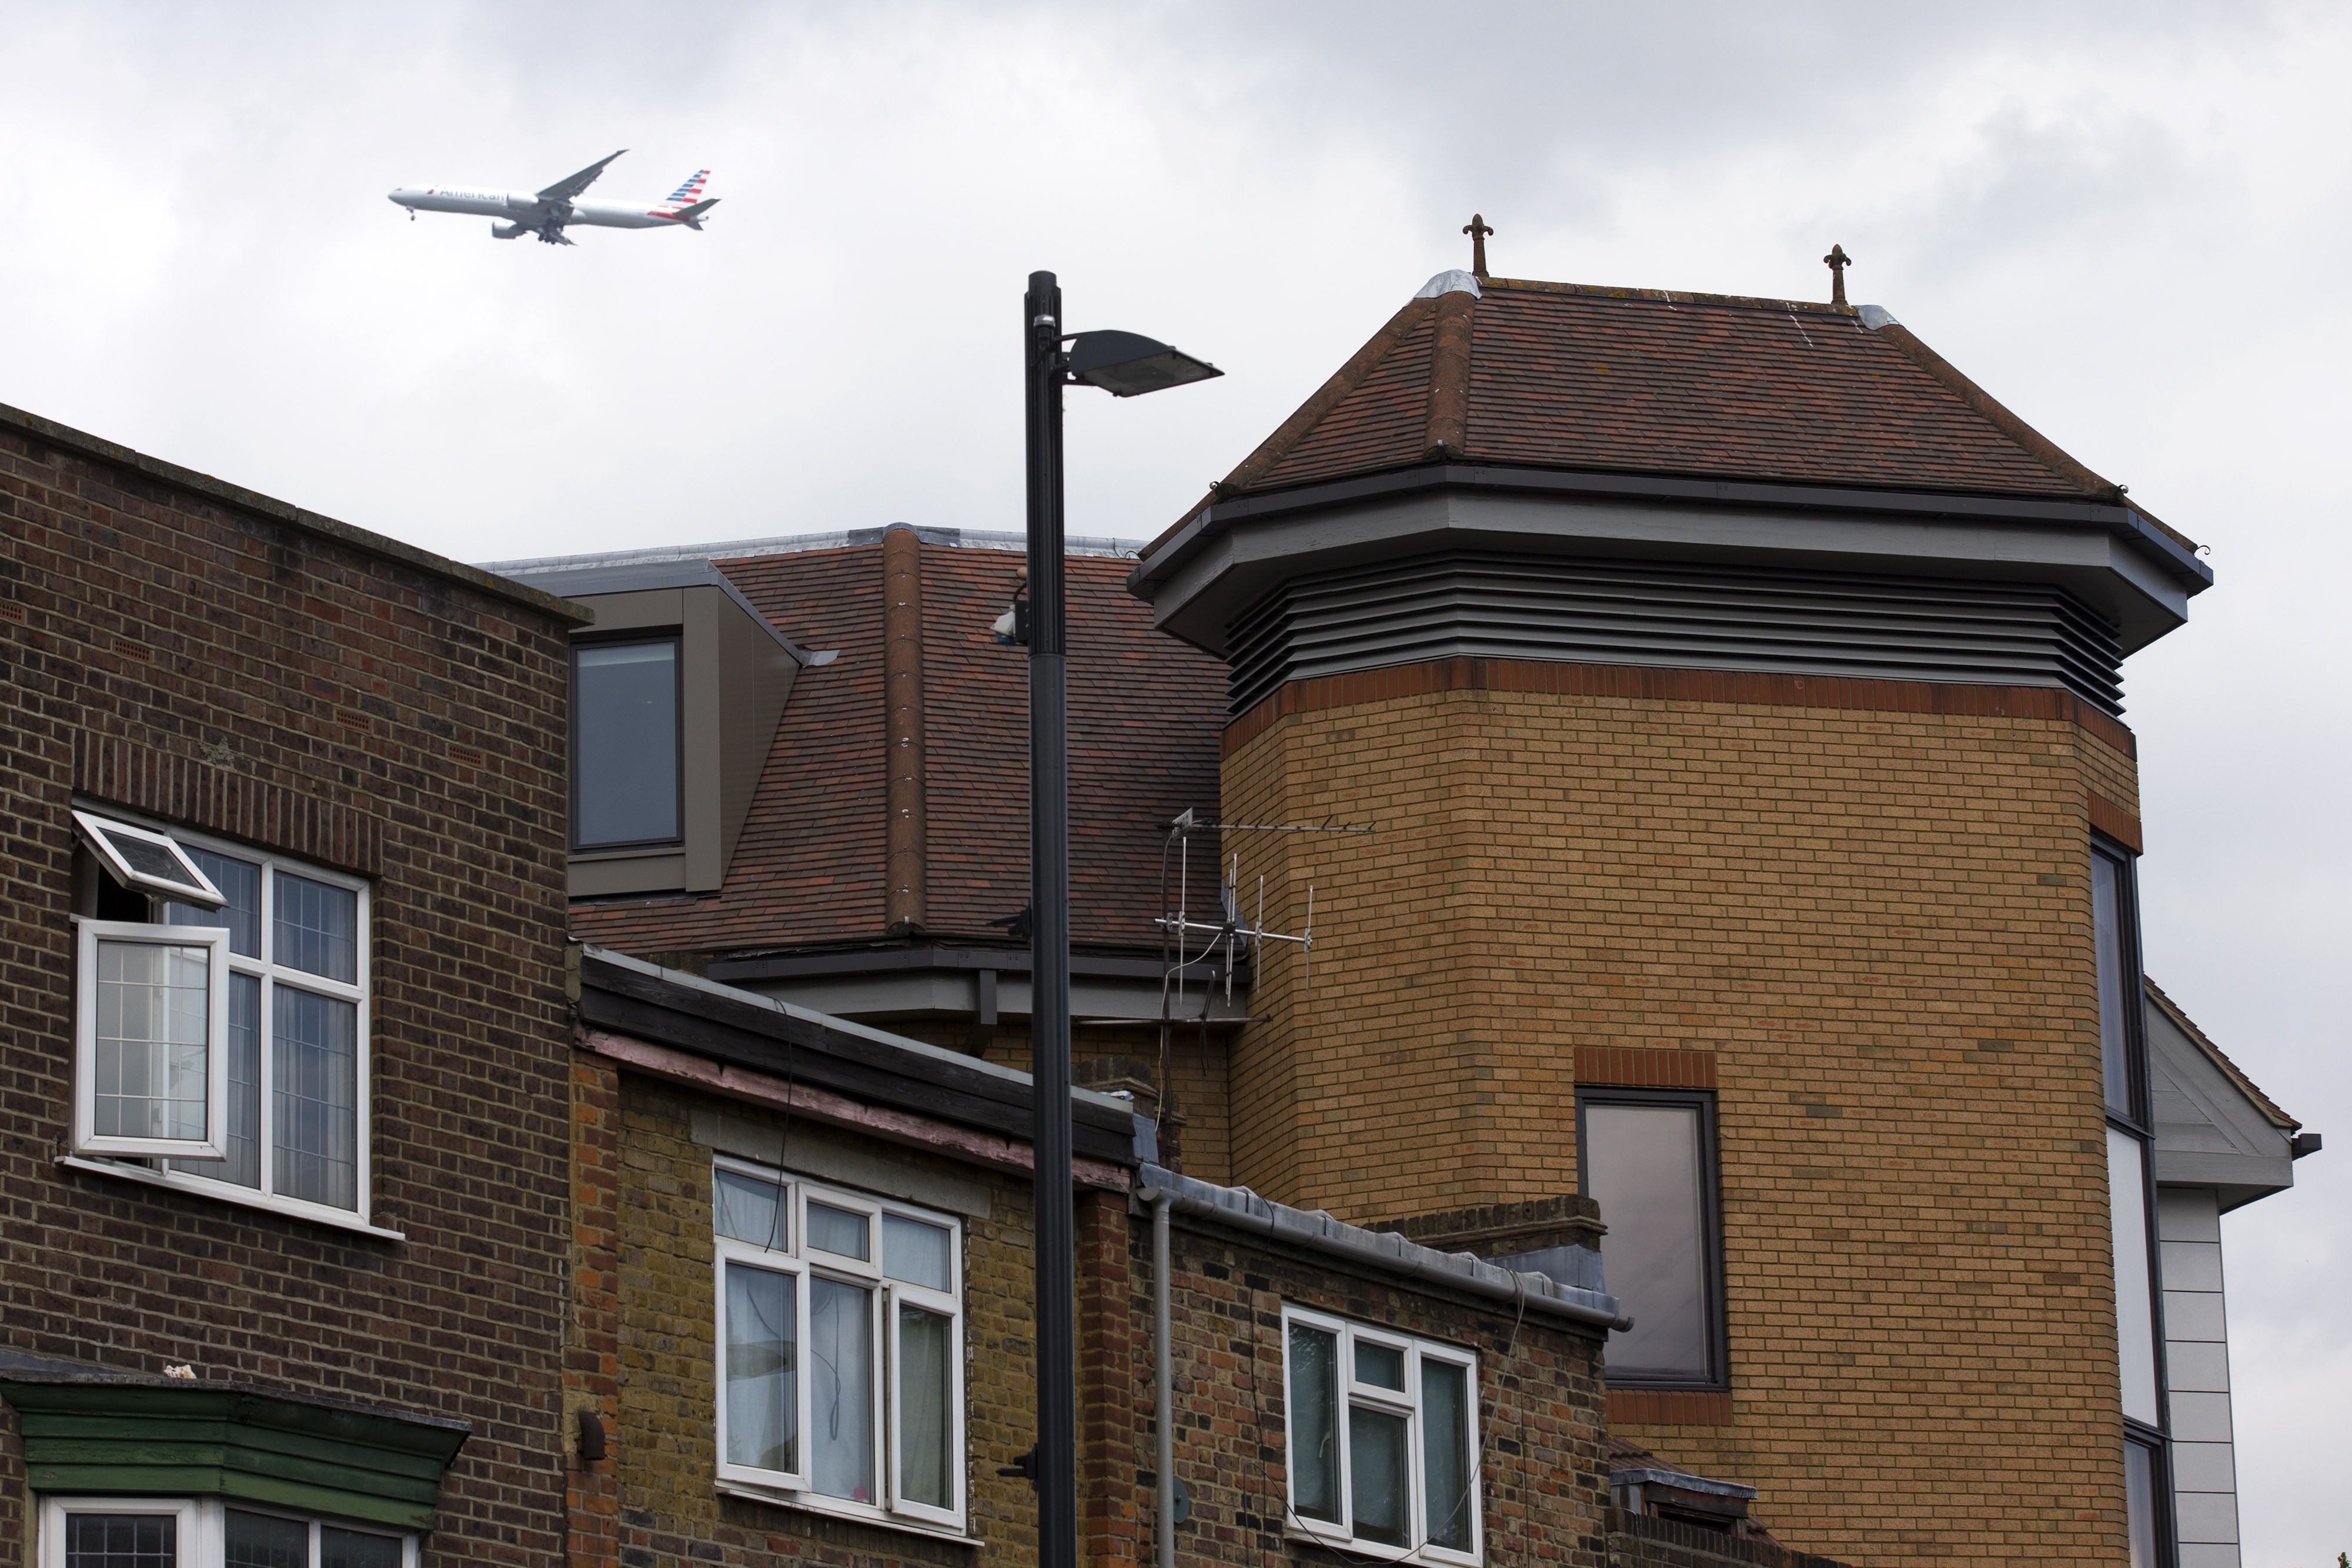 An airplane flying on June 19, 2015, past the offices of notonthehighstreet.com, an online retailer in Richmond, London, where the body of a dead man was found on the roof on June 18 (JUSTIN TALLIS—AFP/Getty Images)